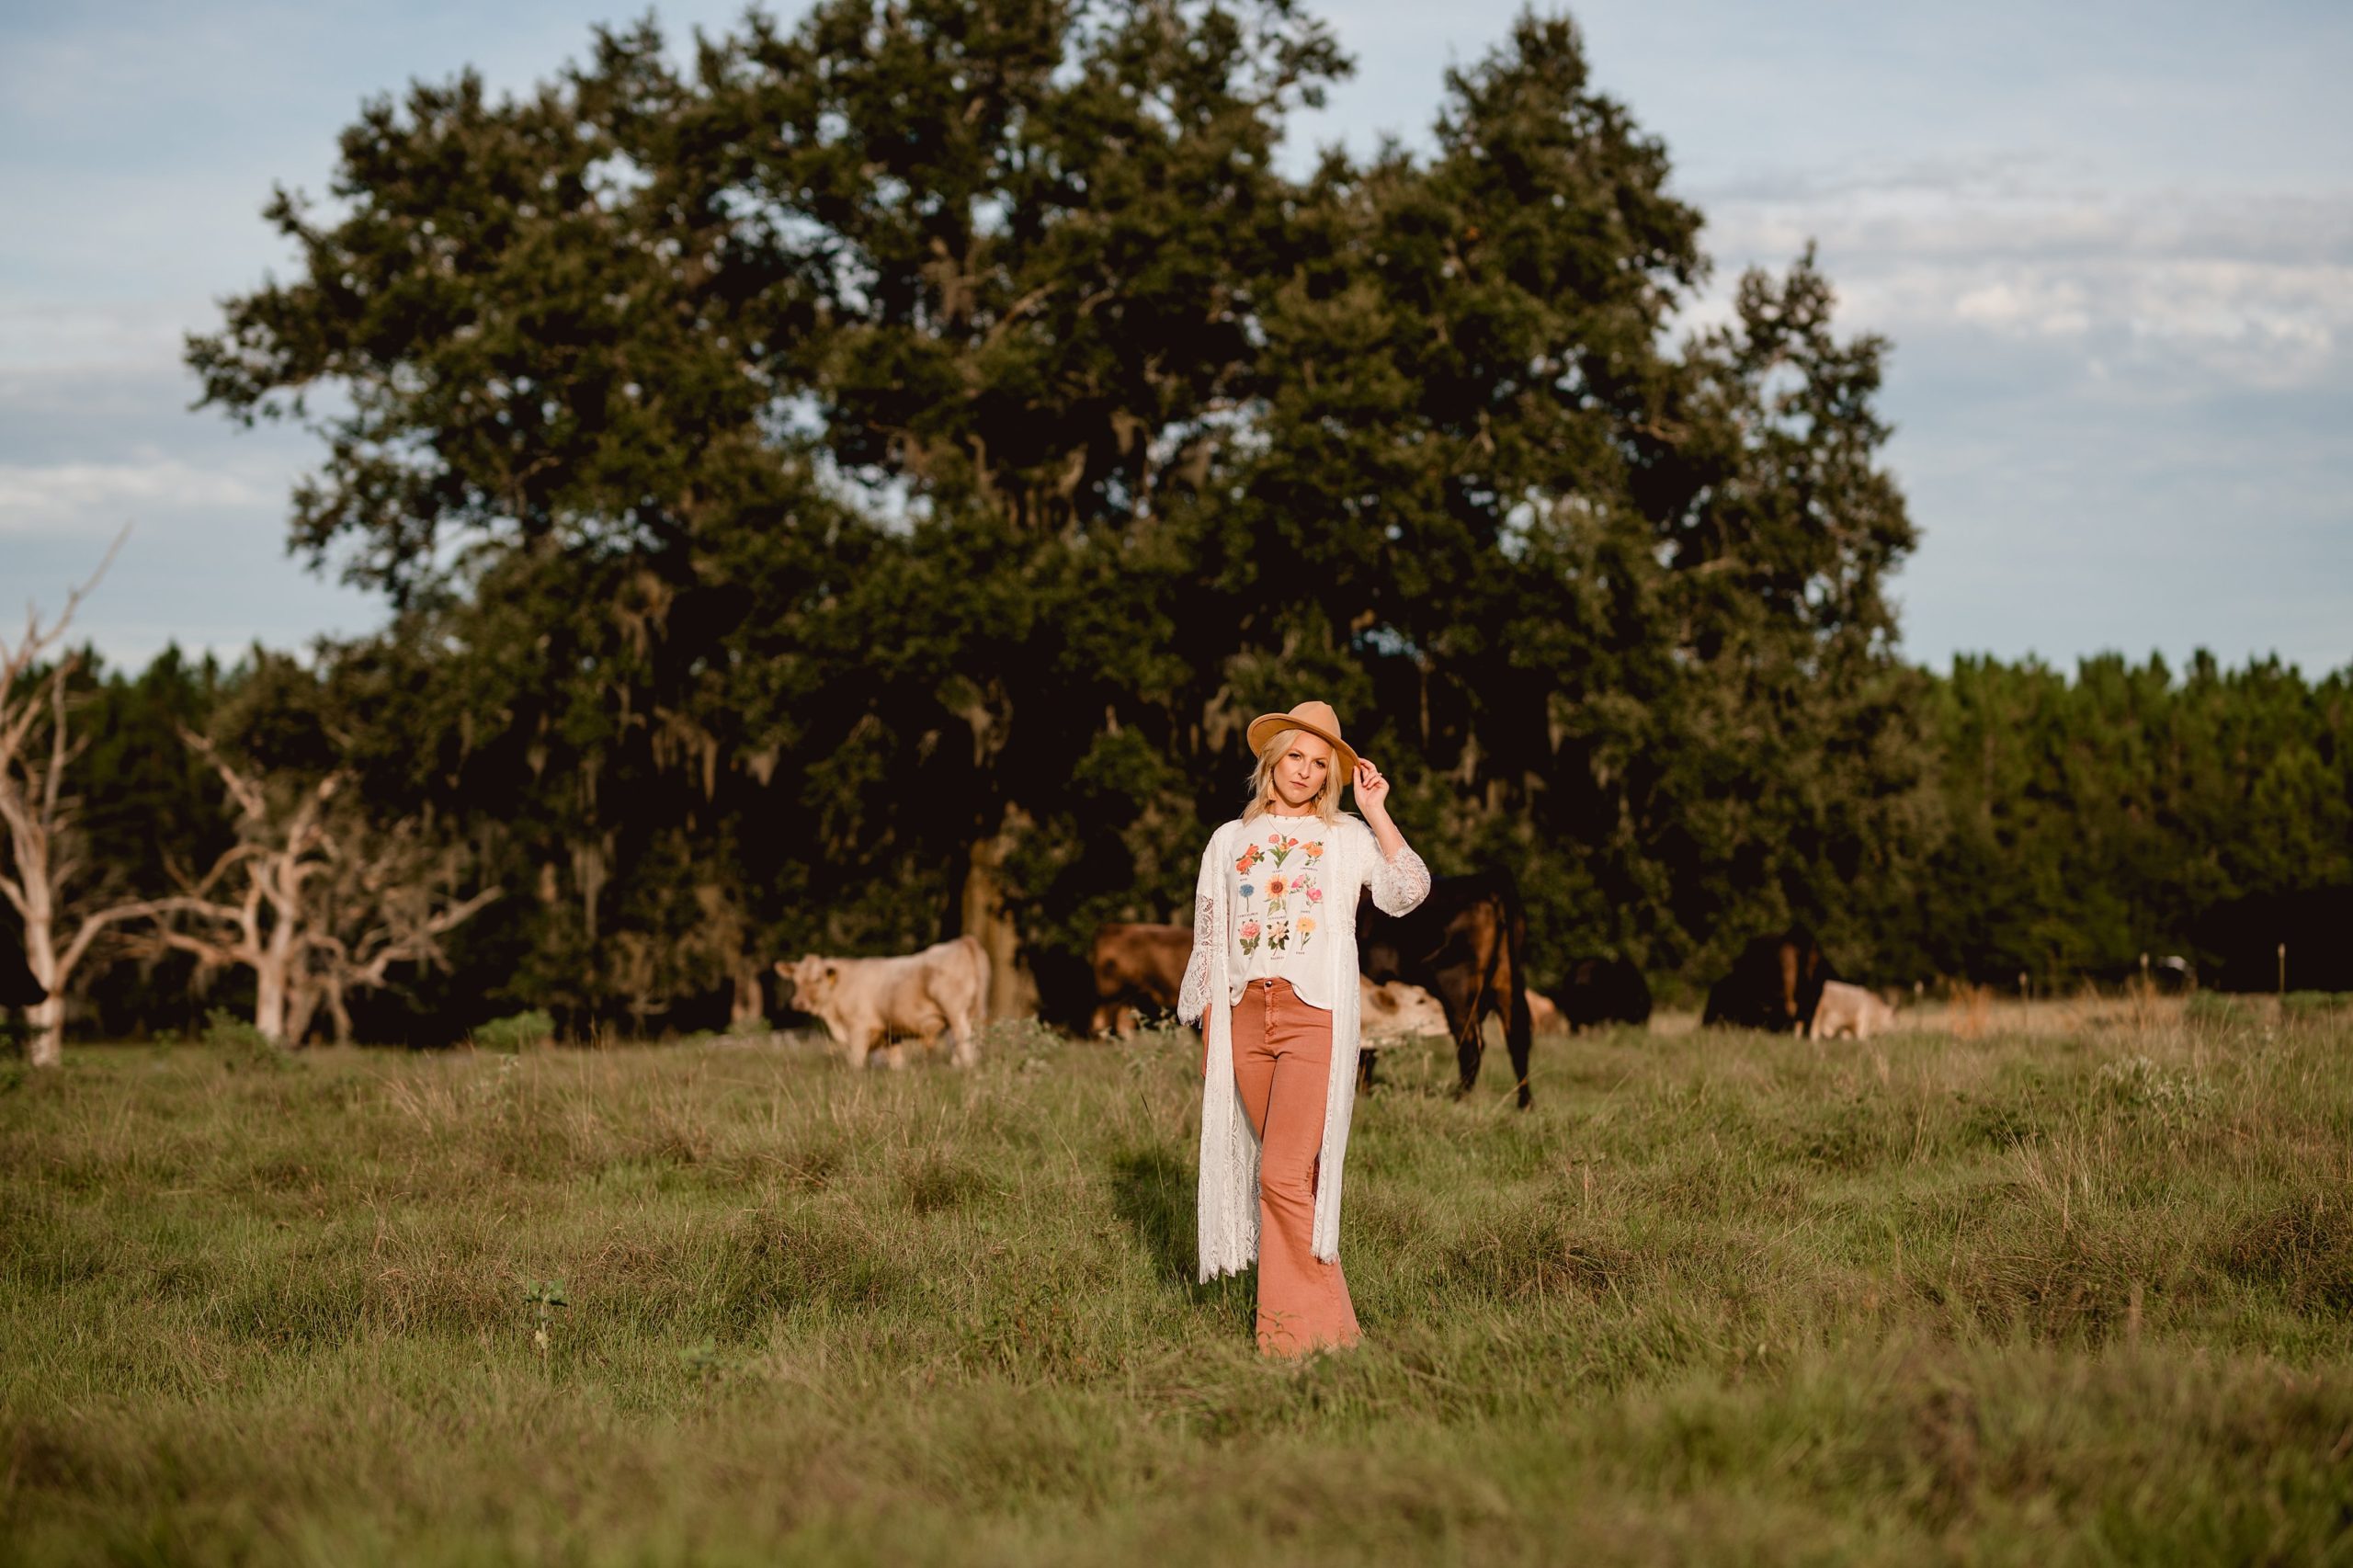 Senior photos on the farm in North Florida by professional photographer.